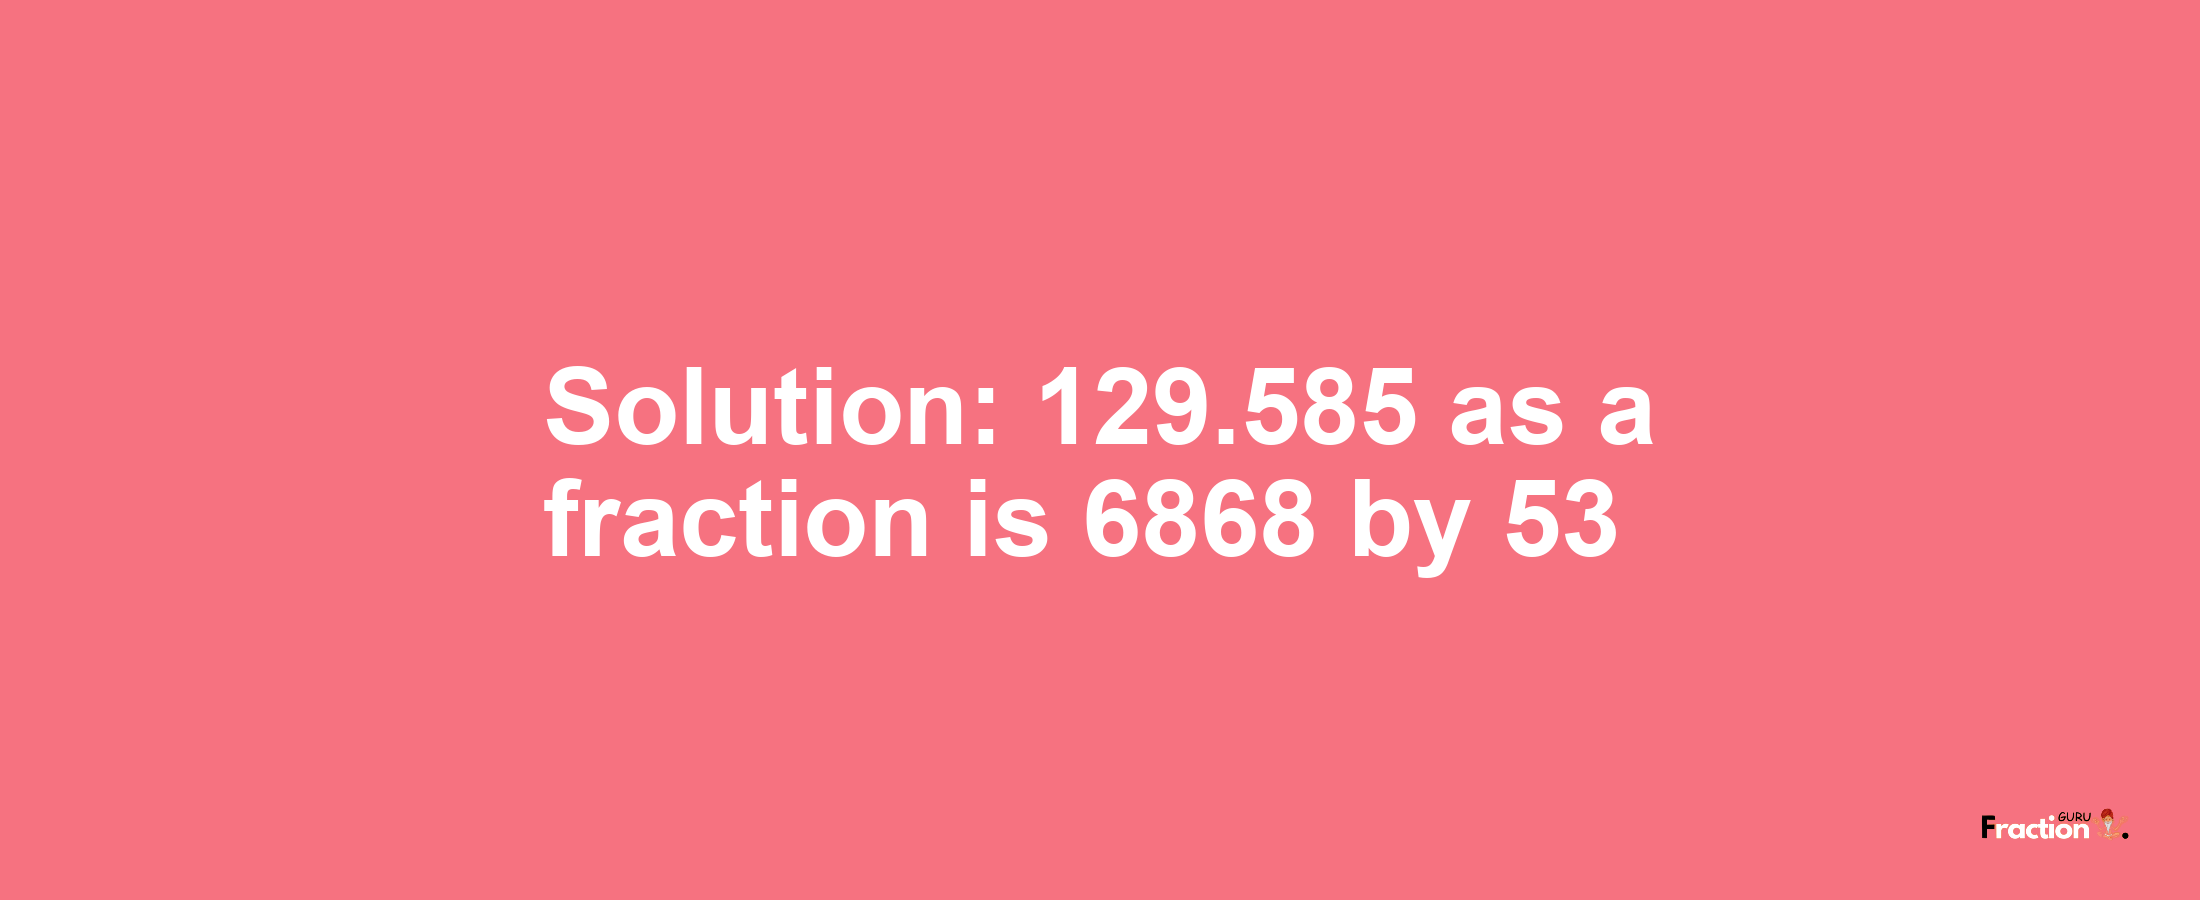 Solution:129.585 as a fraction is 6868/53